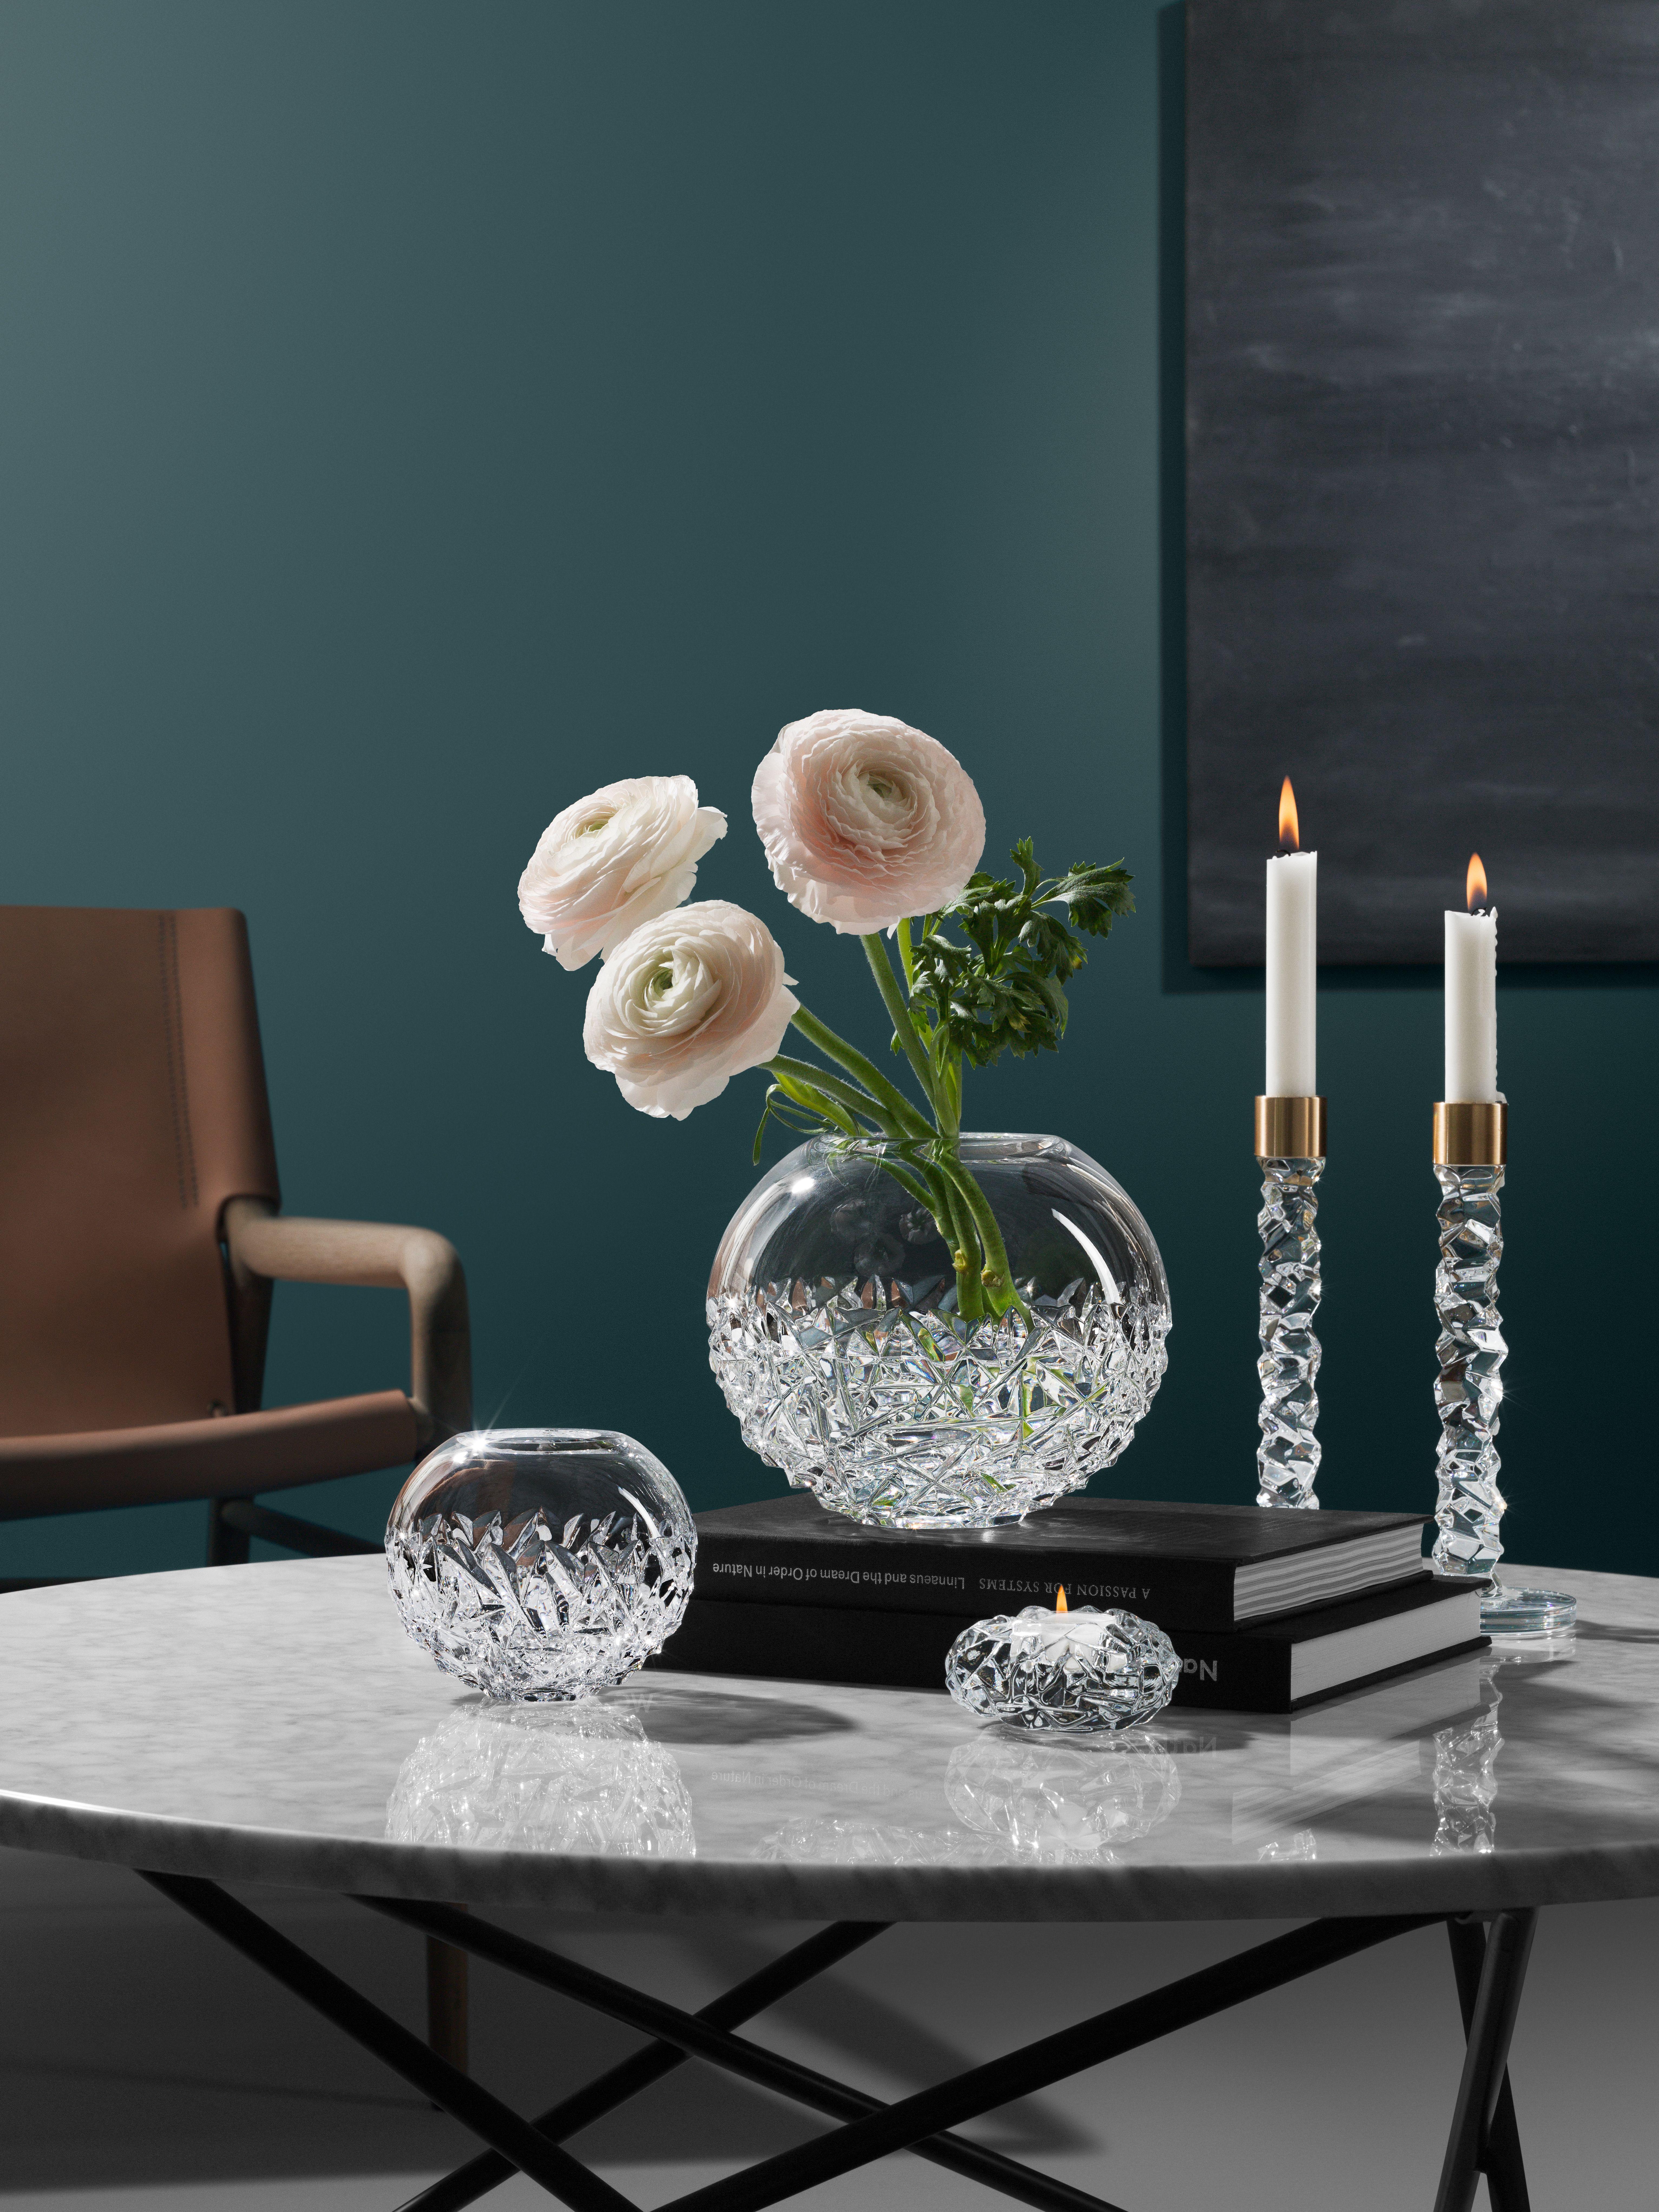 The Carat collection is based on a contemporary interpretation of the traditional cut glass for which Orrefors is world-renowned. The Carat Votive candle holder, available in two sizes, is covered with the collection’s characteristic asymmetrical